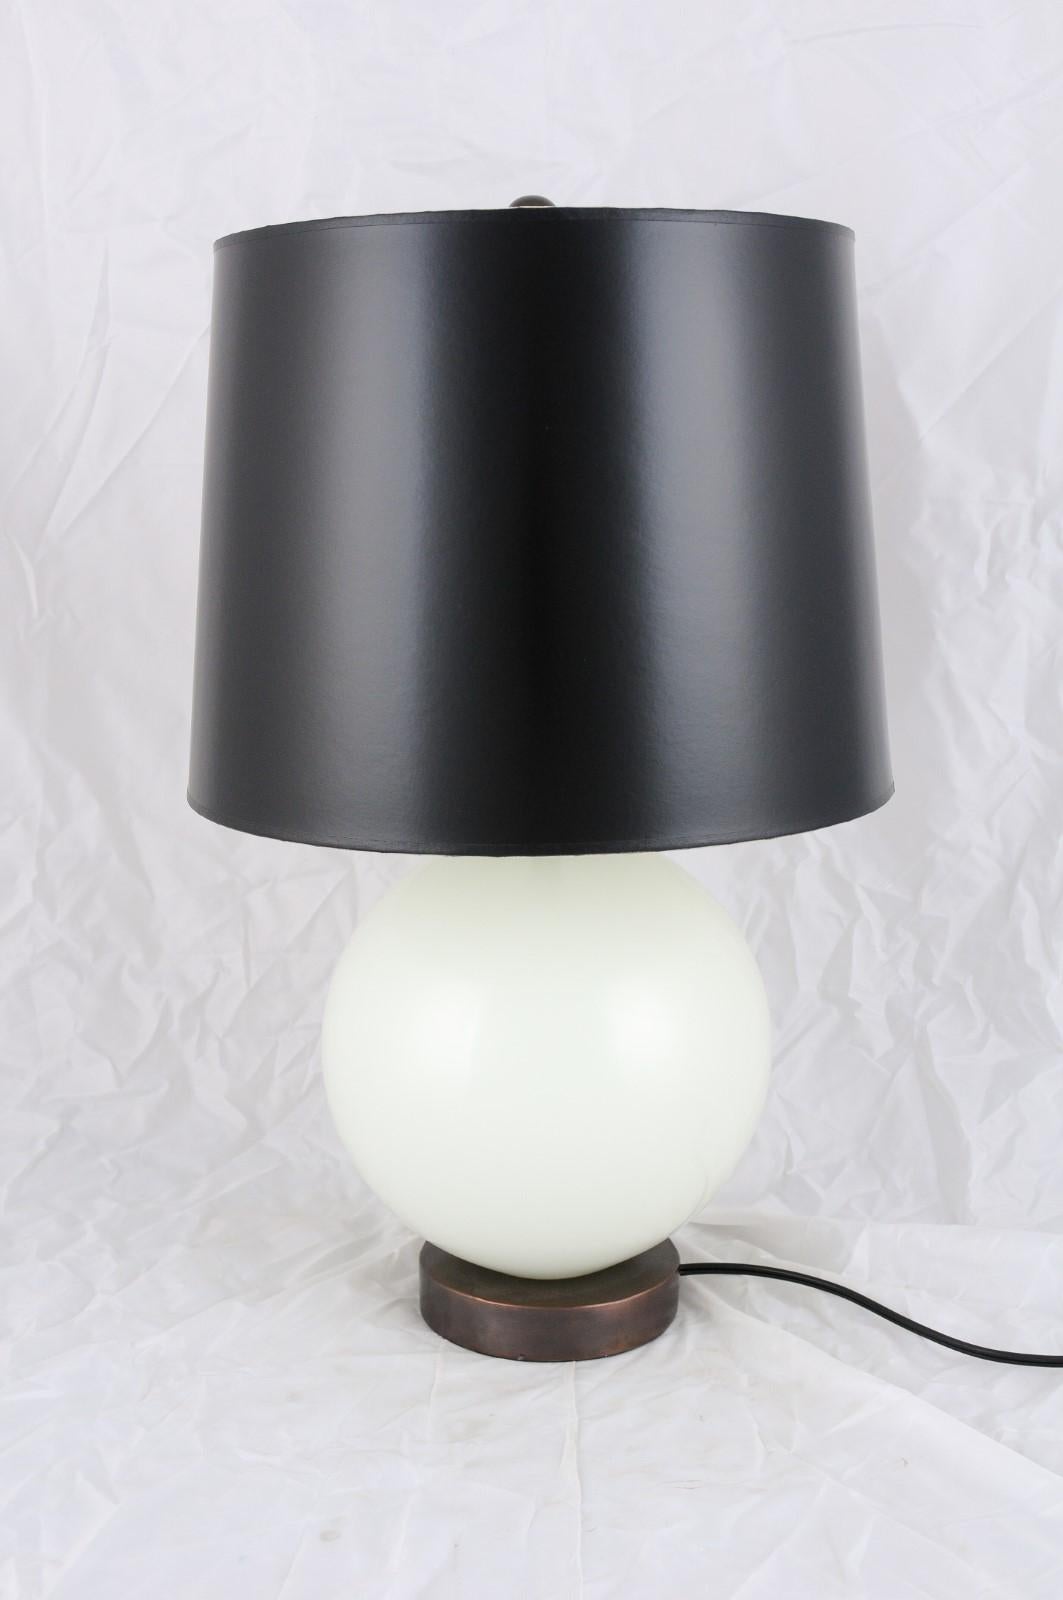 La Lune table lamp in Bai Jade Peking glass with a black copper base and black shade by Robert Kuo.